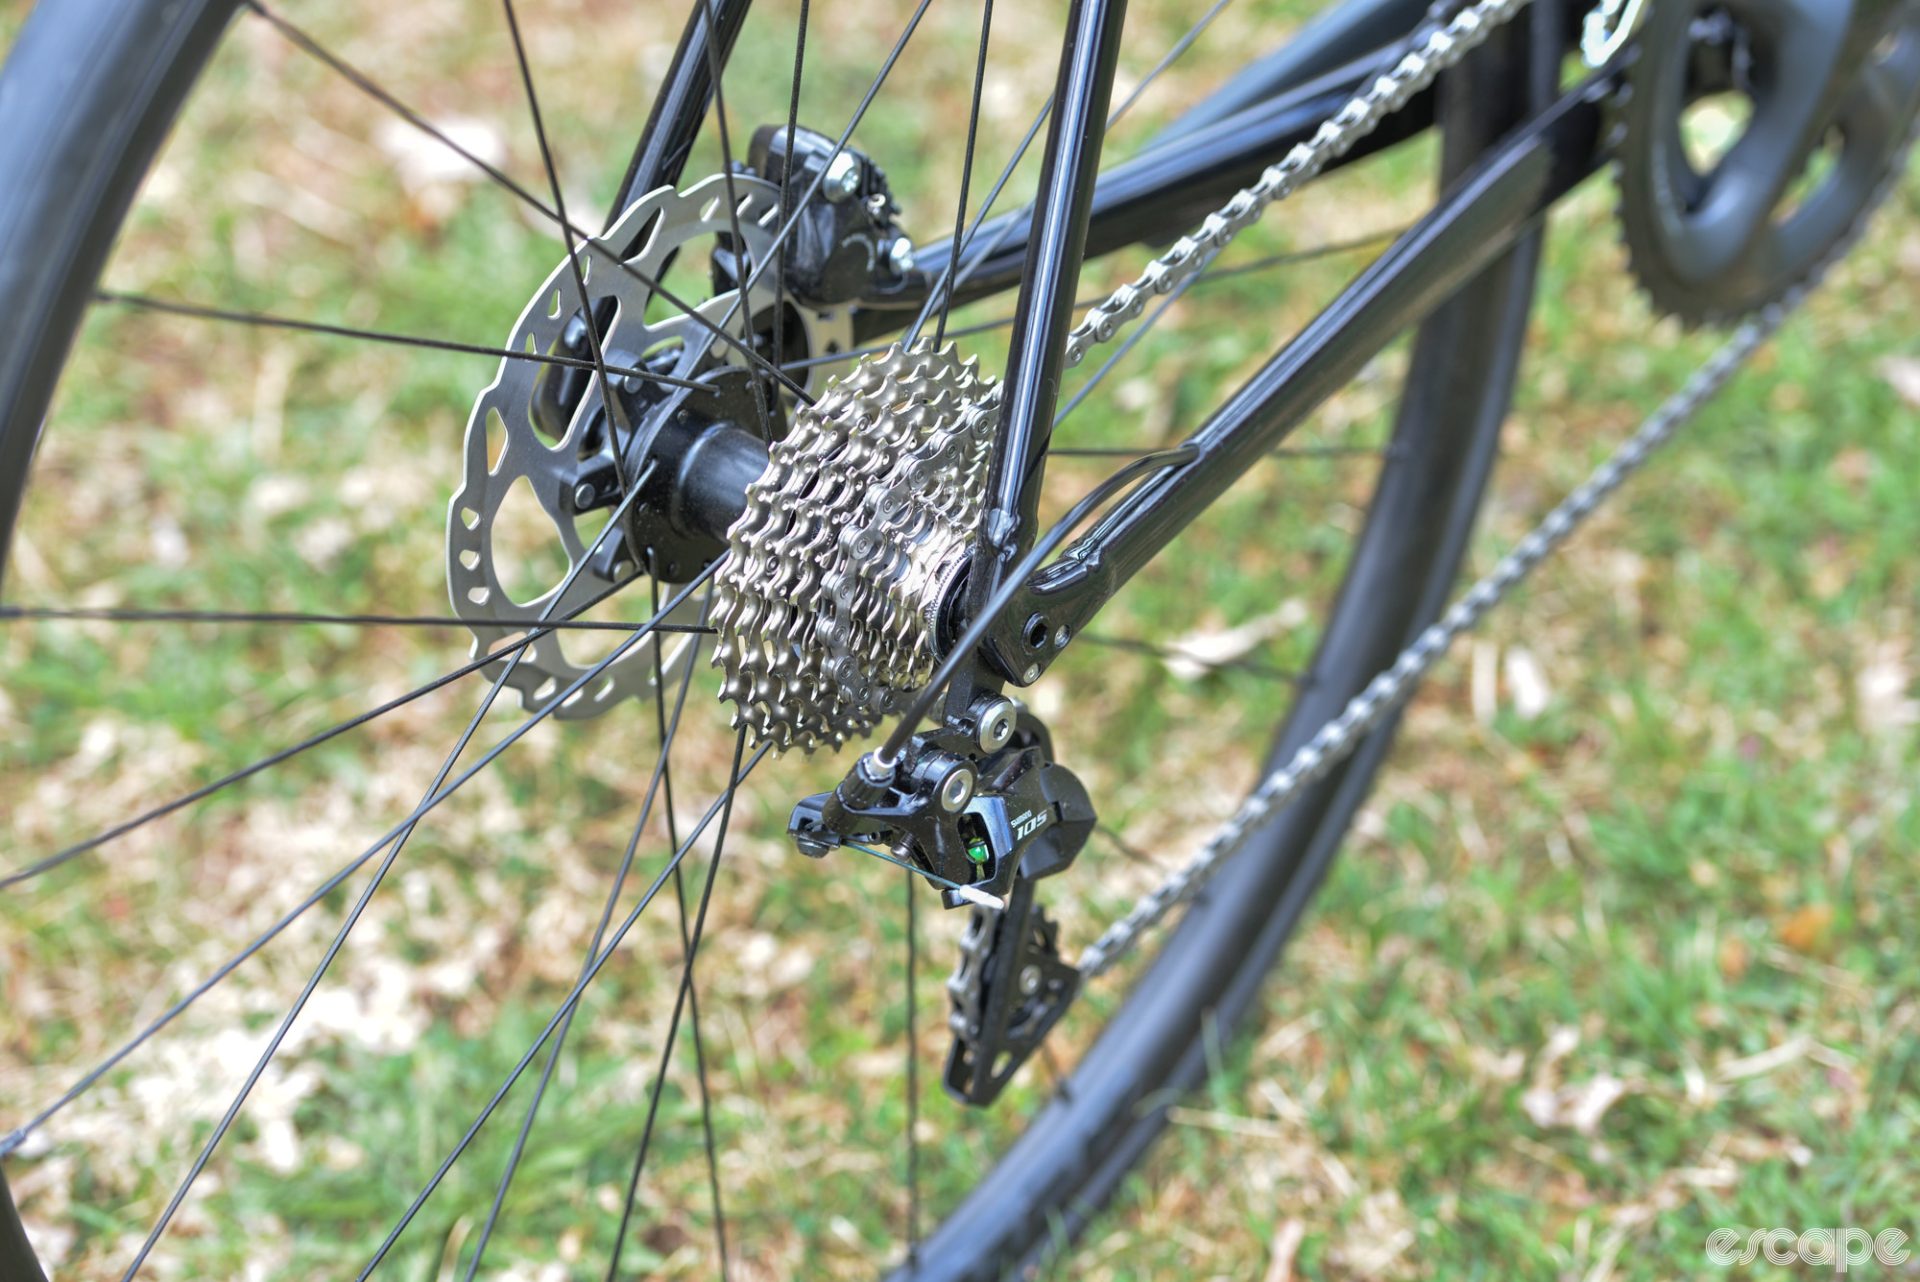 The 11-speed Shimano 105 R7000 rear derailleur and cassette, which is a stock 11-30 combo.